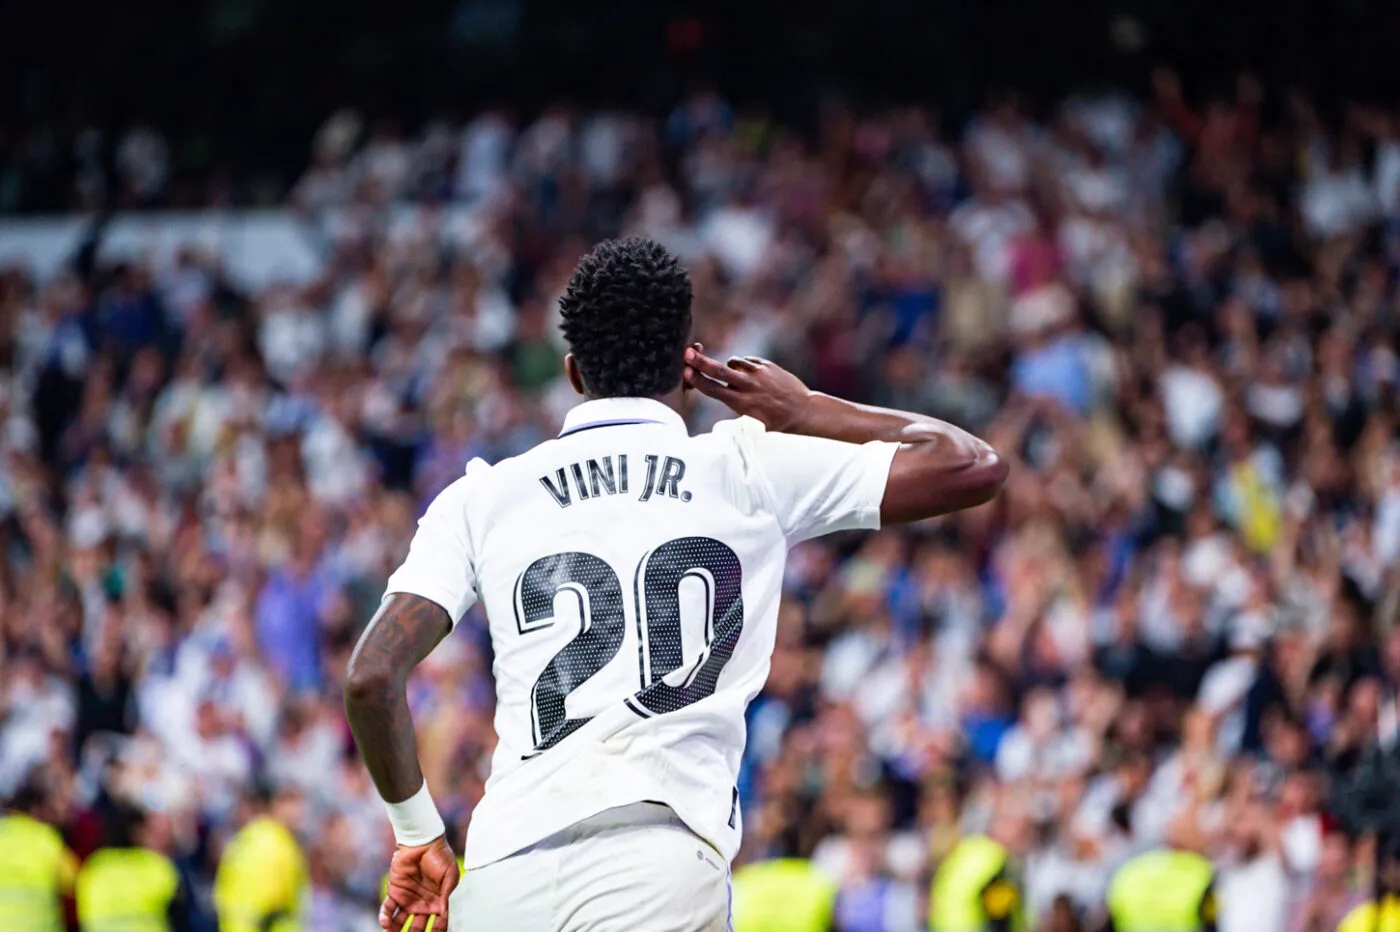 Vinicius Junior (Real Madrid) celebrate his goal during the football match between
Real Madrid and Villareal
valid for the match day 28 of the Spanish first division league ‚ÄúLa Liga‚Äù celebrated in Madrid, Spain at Bernabeu stadium on Saturday 08 April 2023 - Photo by Icon sport